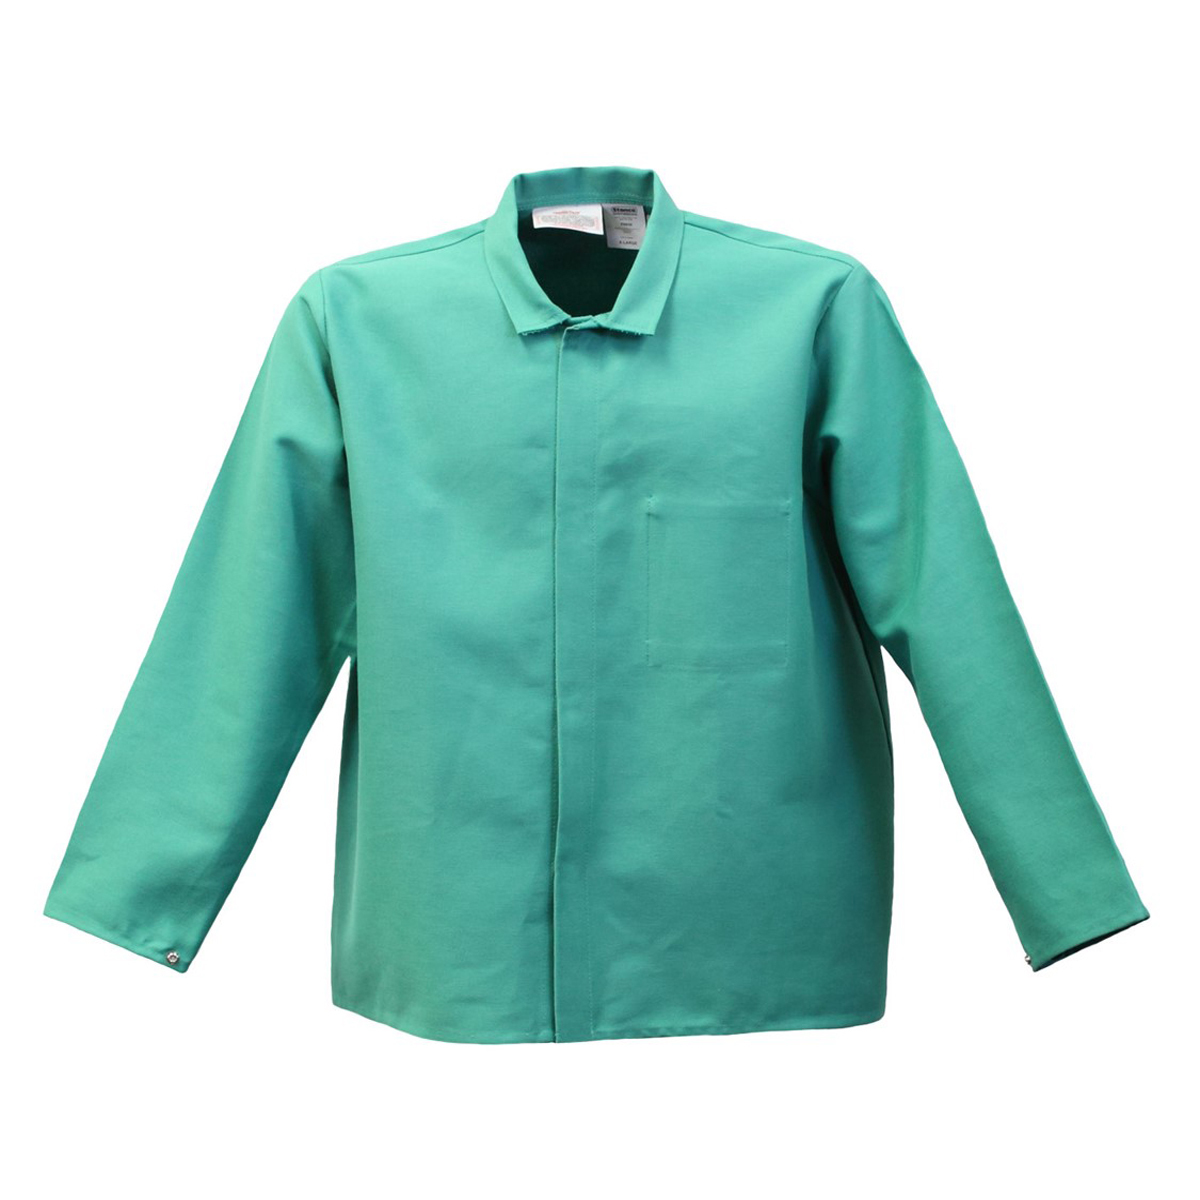 Stanco Safety Products™ 2X Green Cotton Flame Resistant Welding Jacket With Hook And Loop Closure And 2